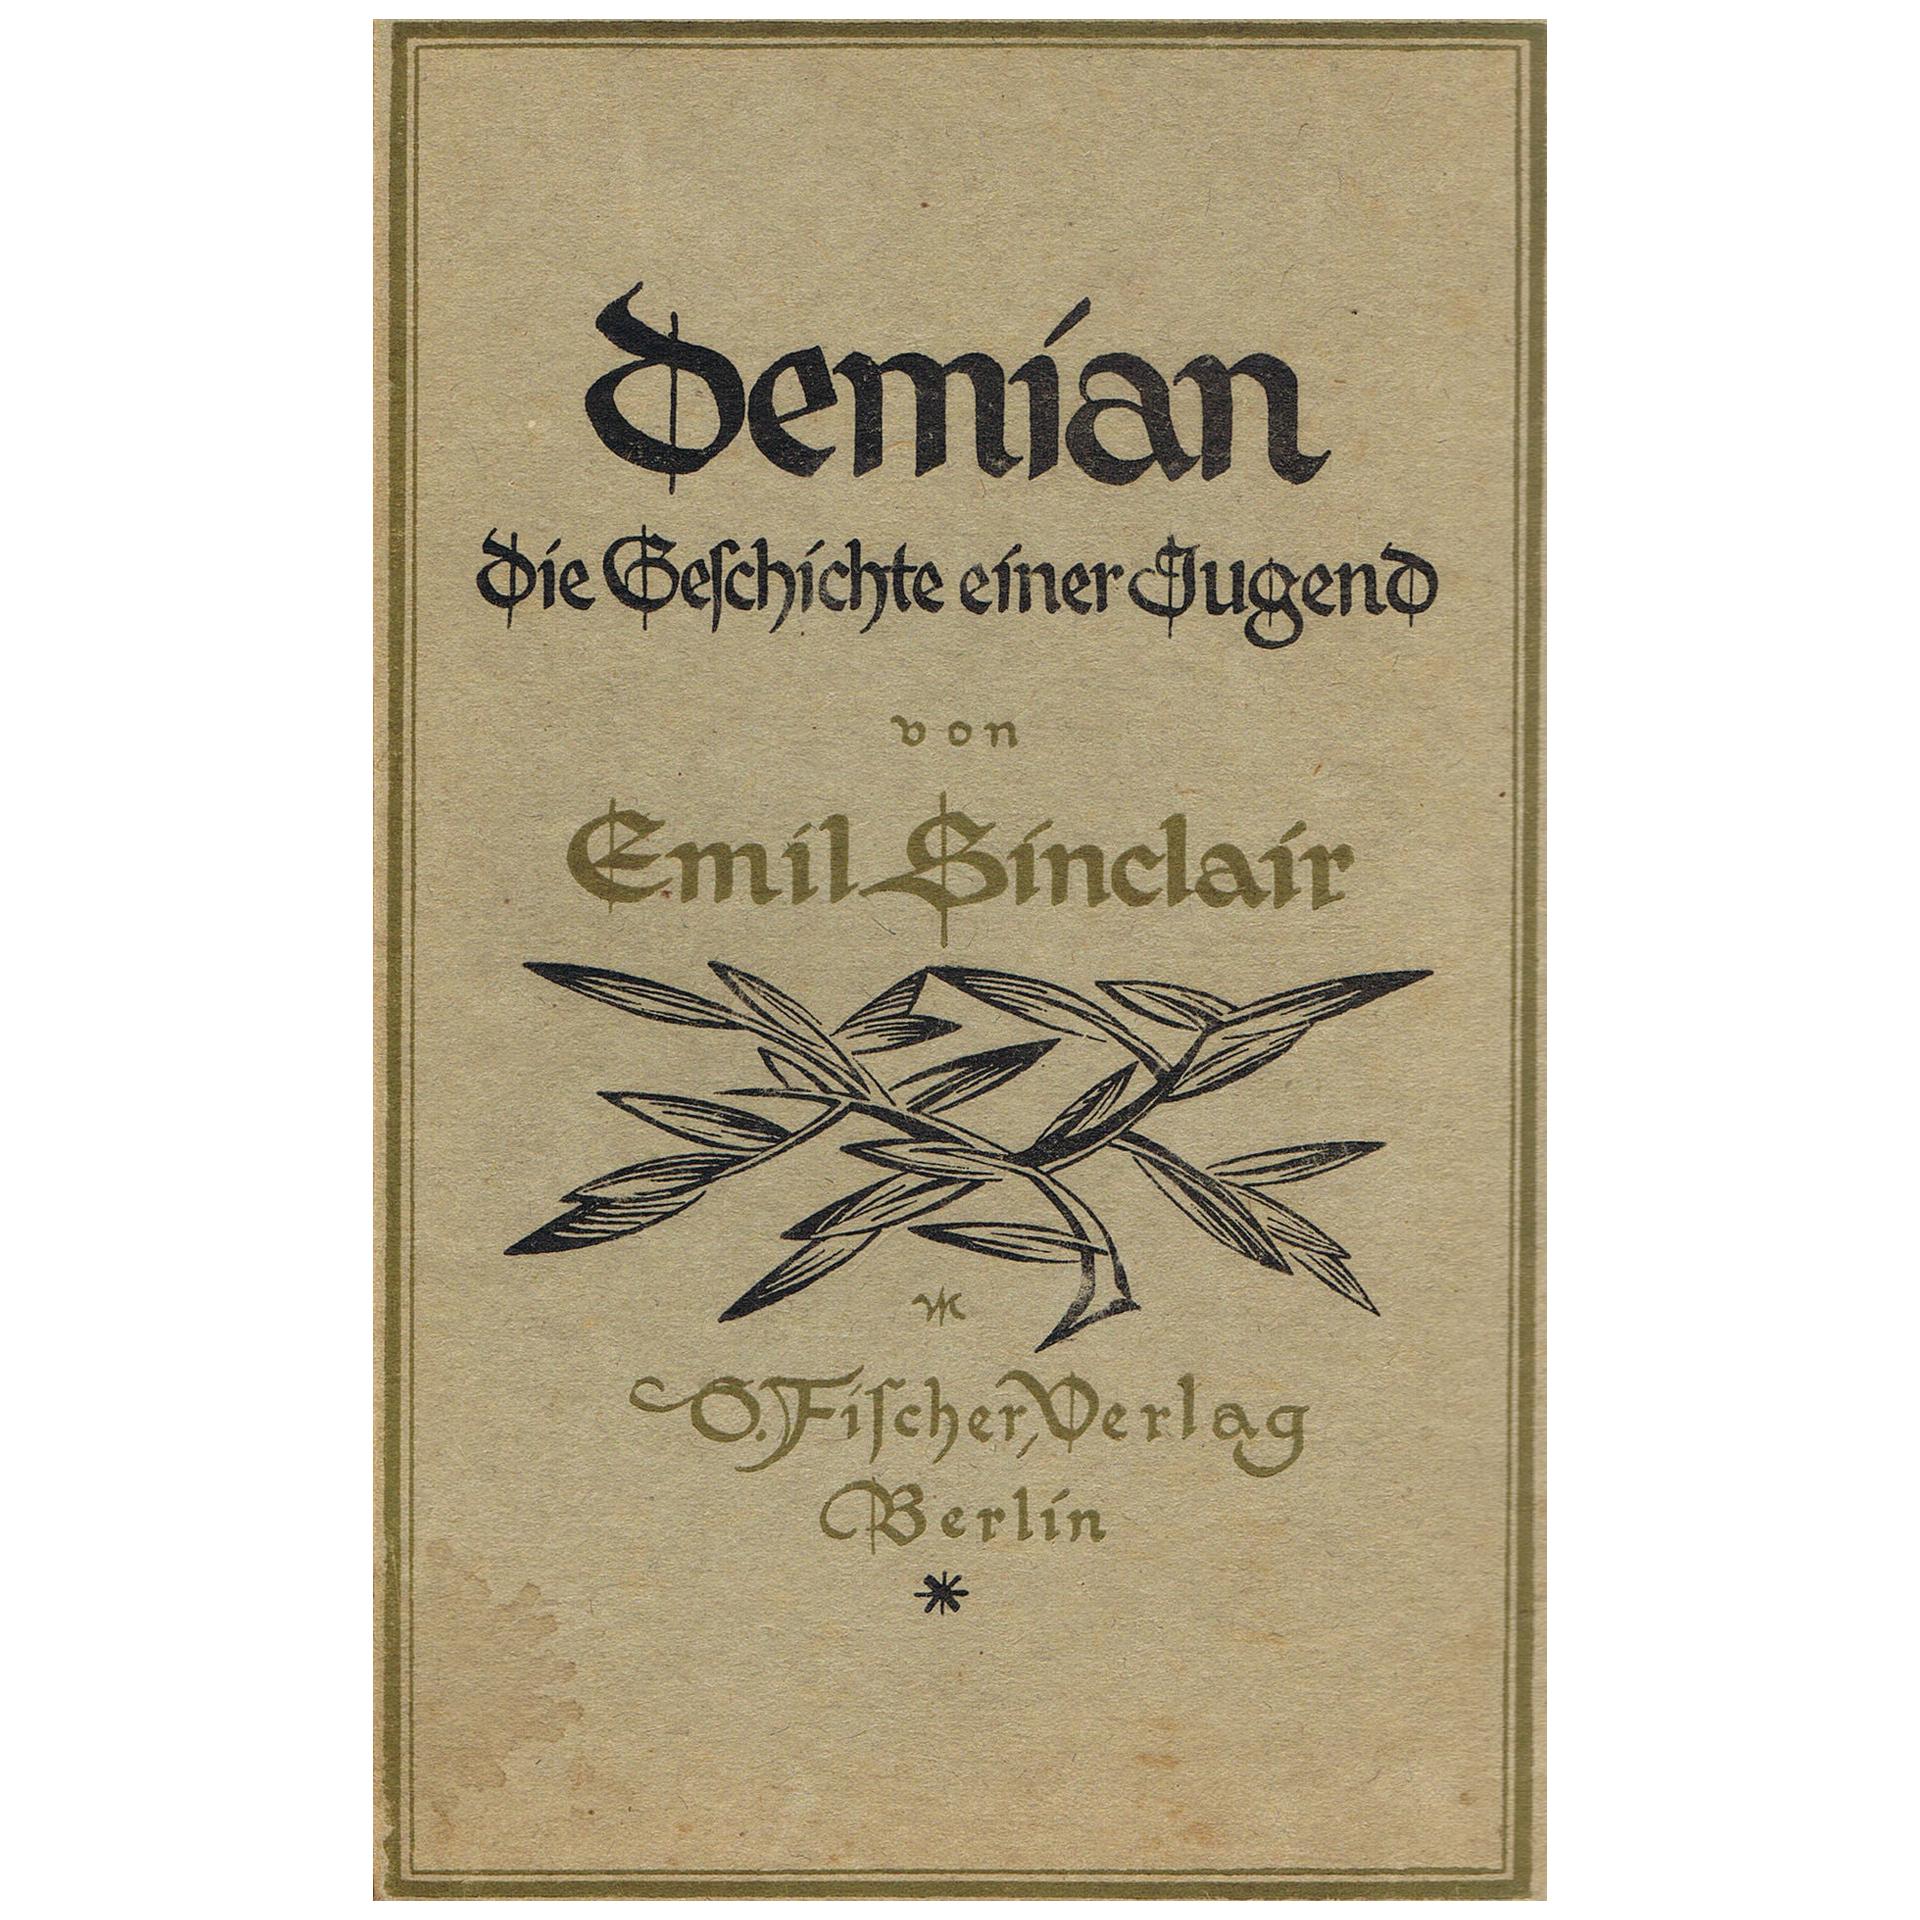 Novel Demian, The Story of Emil Sinclair's Youth by Hermann Hesse, Berlin, 1919